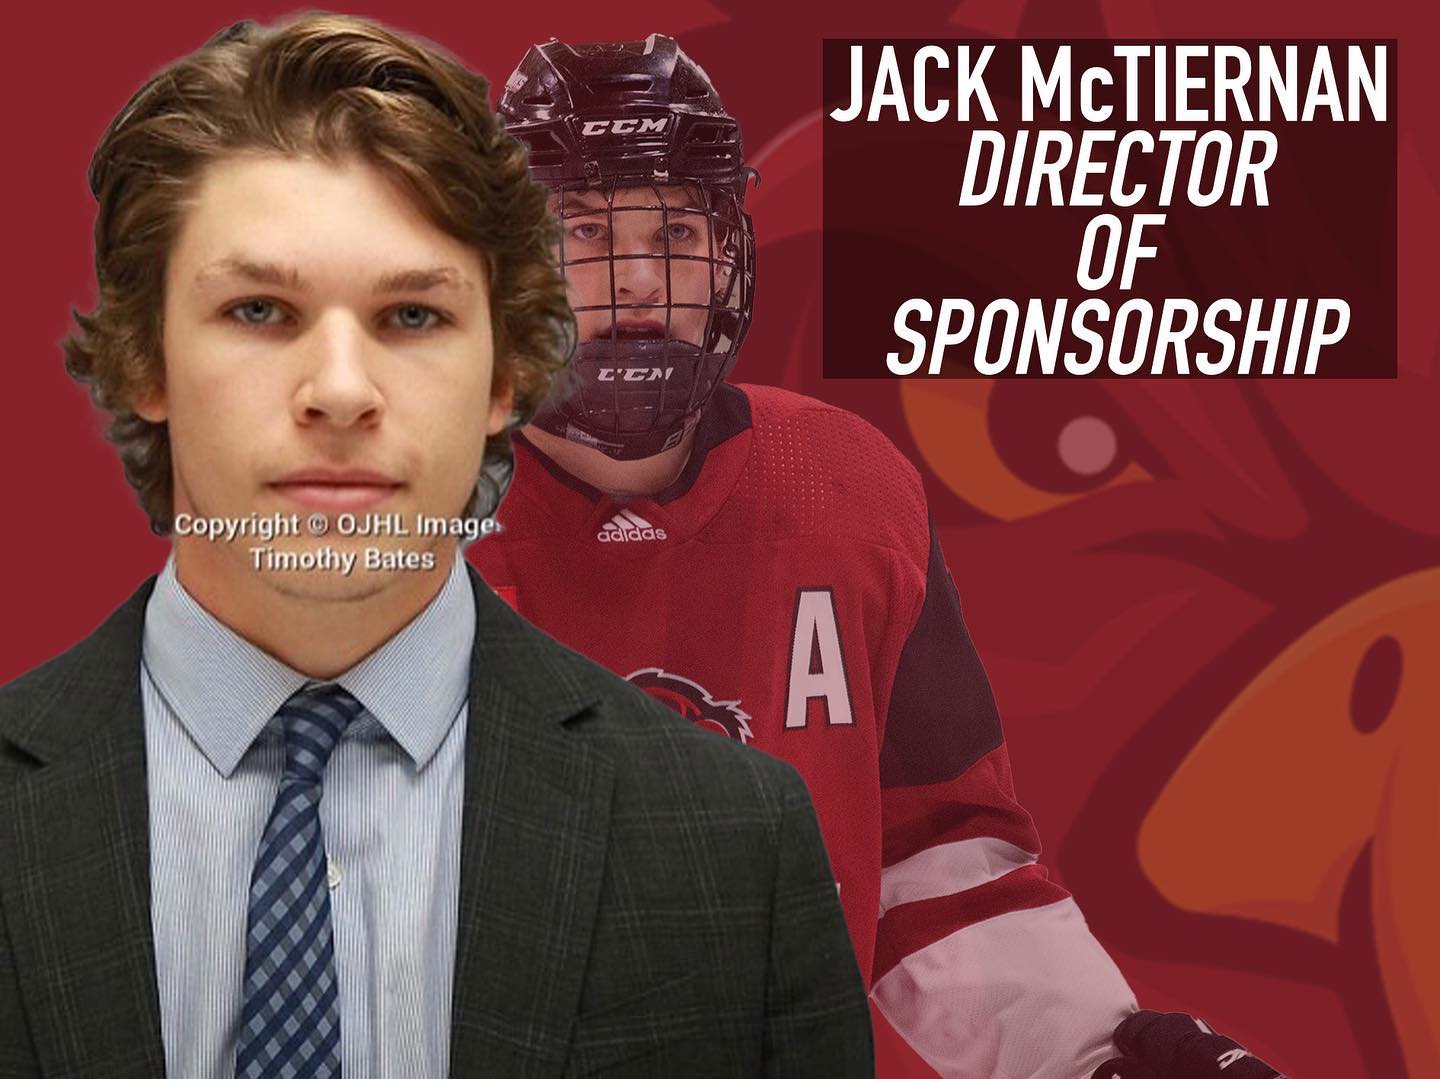 We are happy to announce that former Cambridge RedHawk Assistant Captain, Jack McTiernan, will be joining our staff as the Director of Sponsorship. 

Jack has been attending the University of Guelph and is in his fourth year of the Food and Agriculture Business program. 

For sponsorship inquiries, he can be reached at jmctiernan@cambridgeredhawks.com
(All sponsorship information is on our website as well!)

Welcome back to the organization Jack!